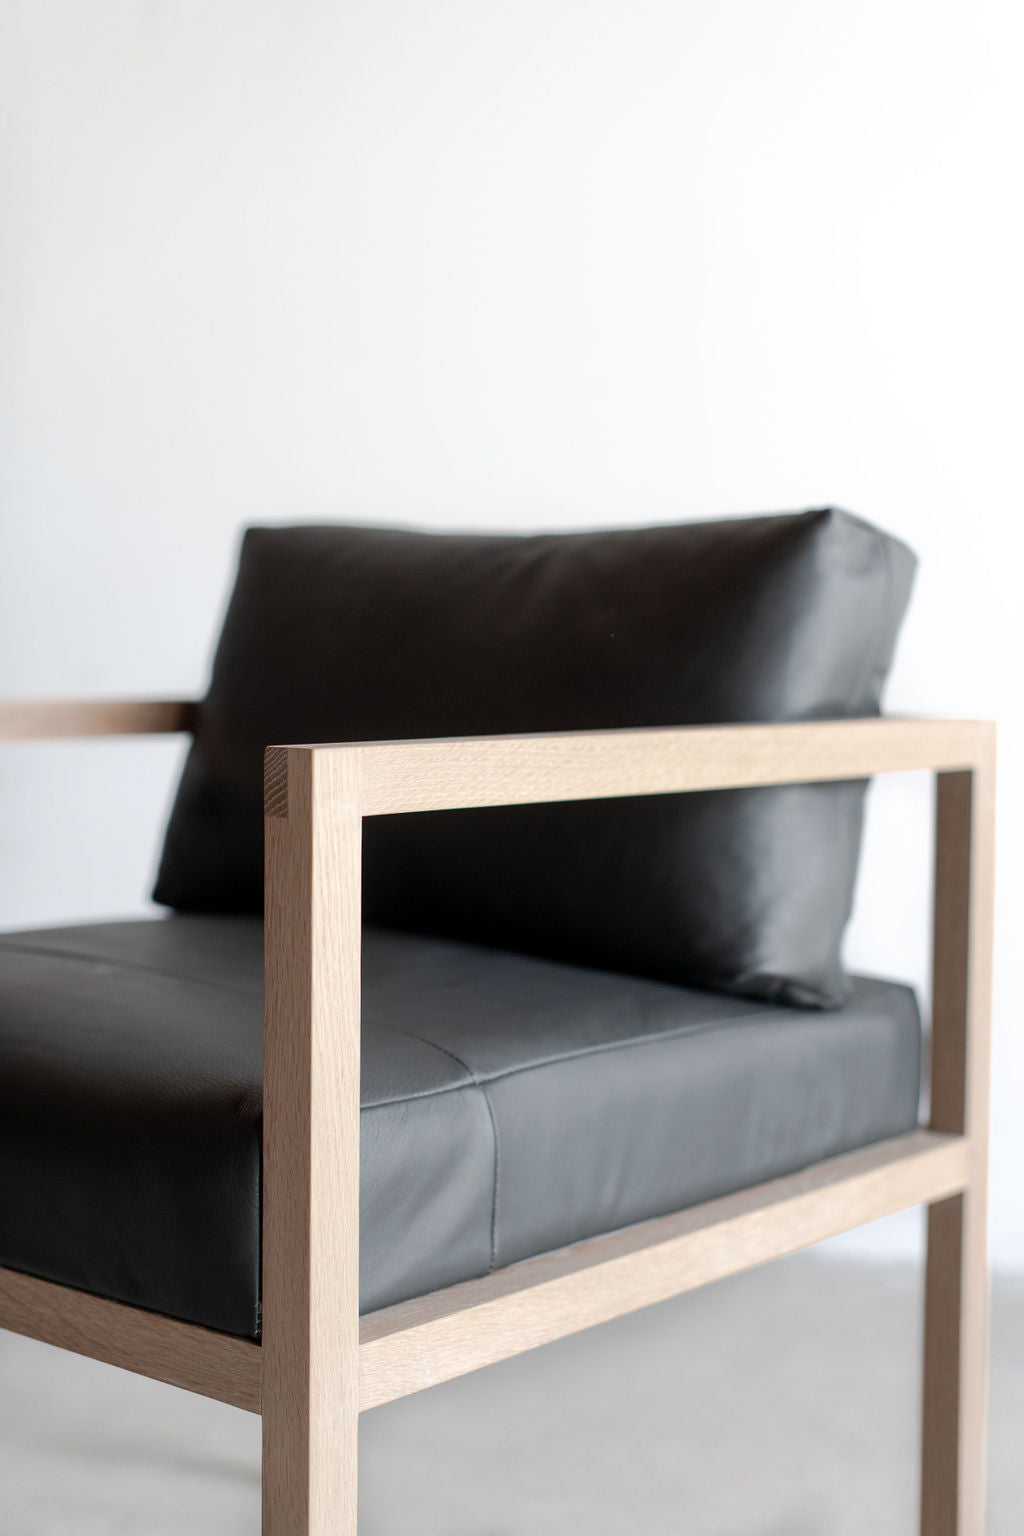 Eve dining chair - black leather - side shot of wood base and leather cushion